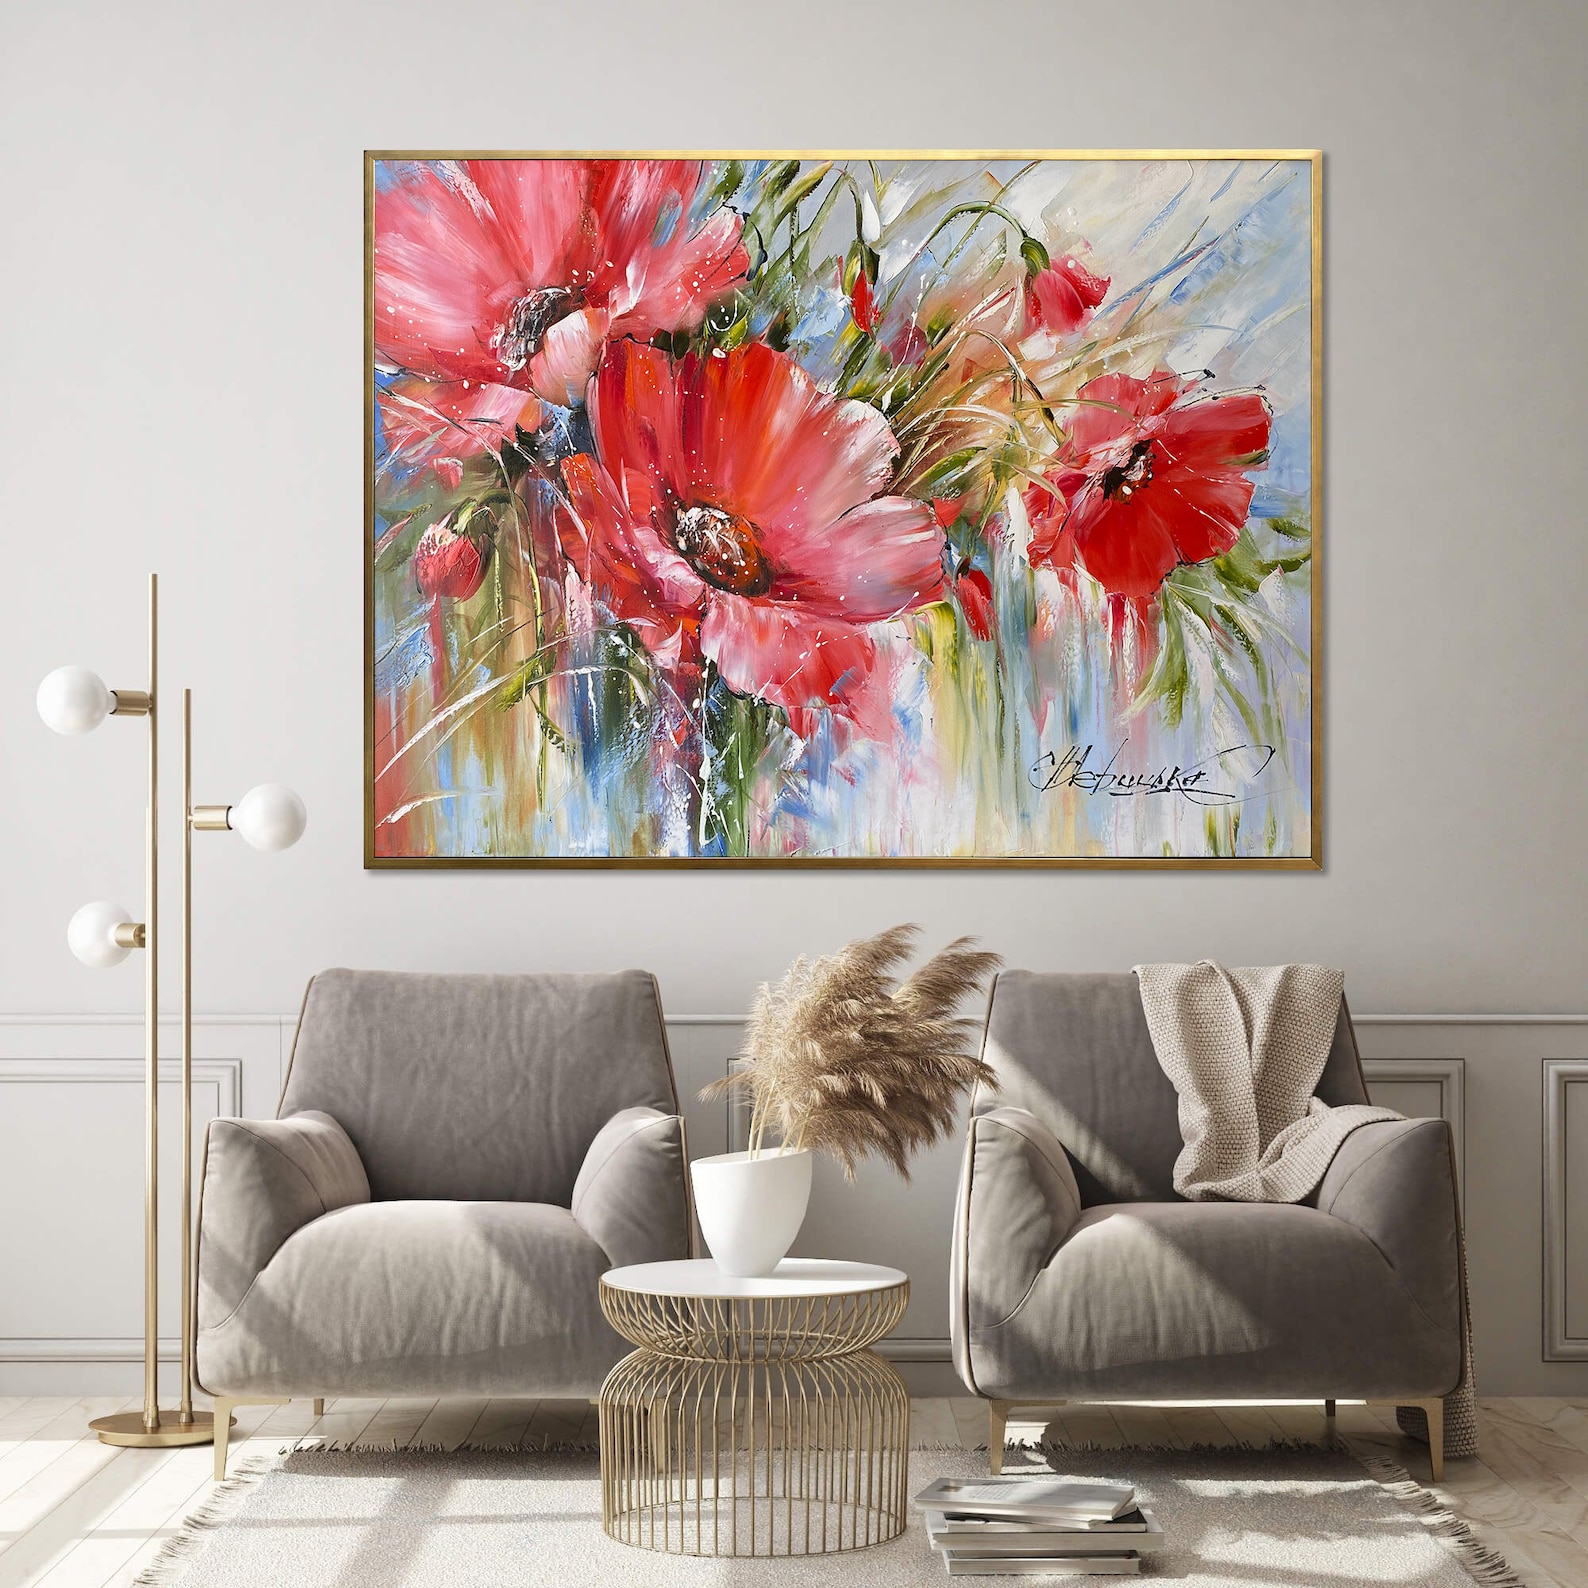 Red Poppies Original Painting Large Blooming Flowers Wall - Etsy